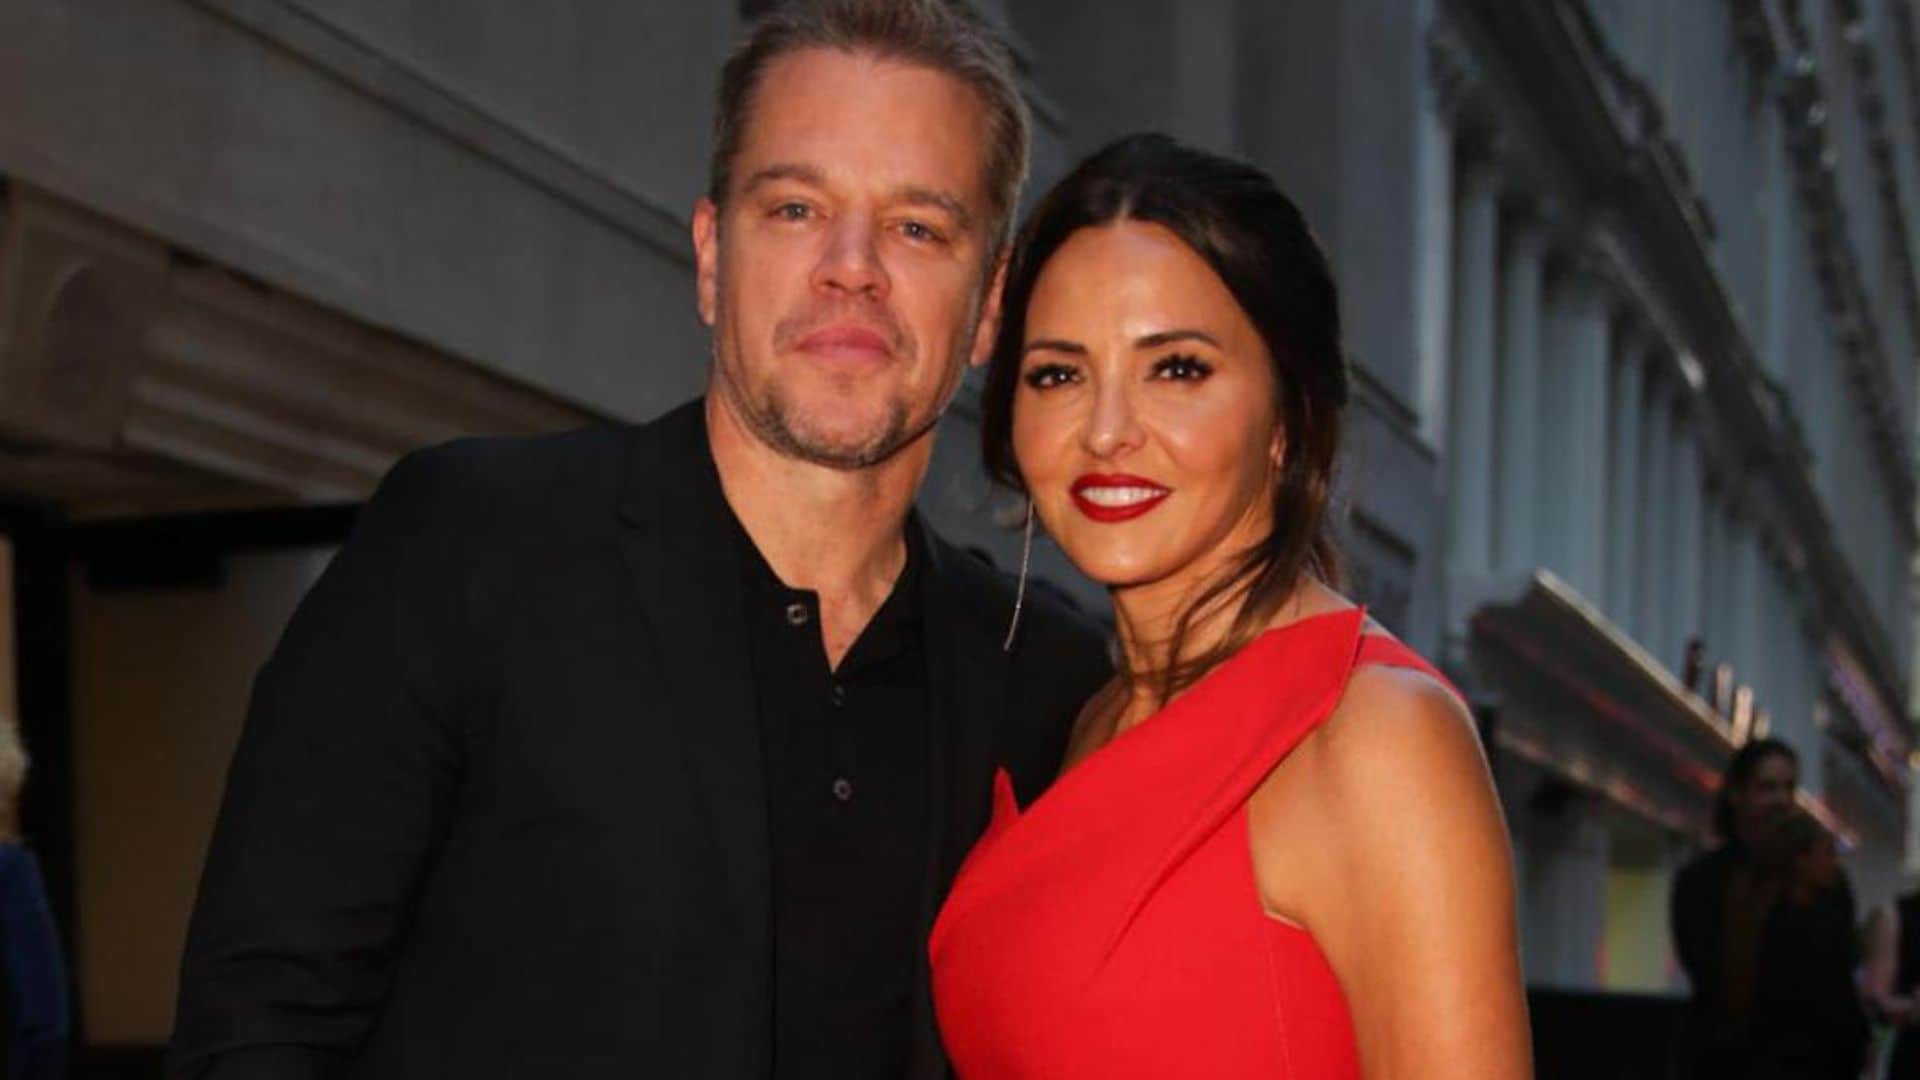 Matt Damon and wife Luciana Barroso look stylish in recent outing in New York City